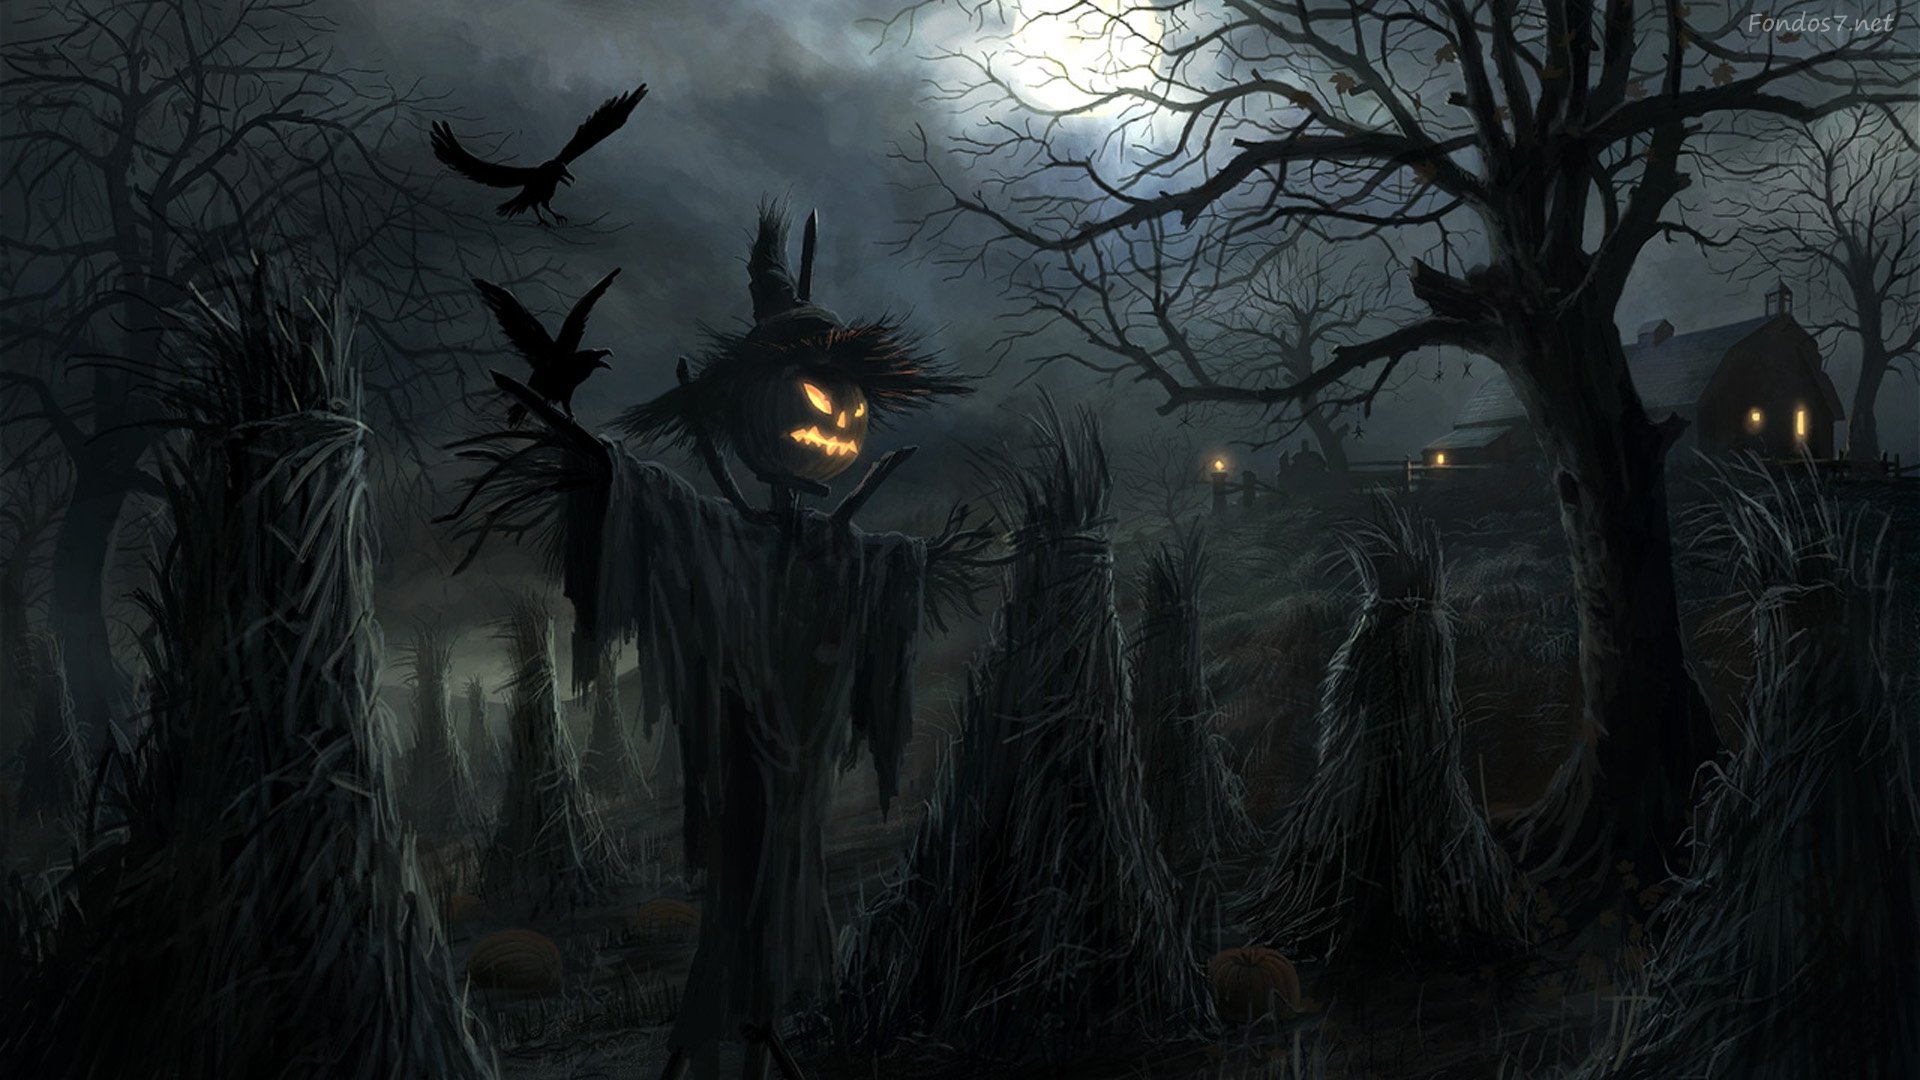 Halloween 2013 wallpaper collection The Windows Site for